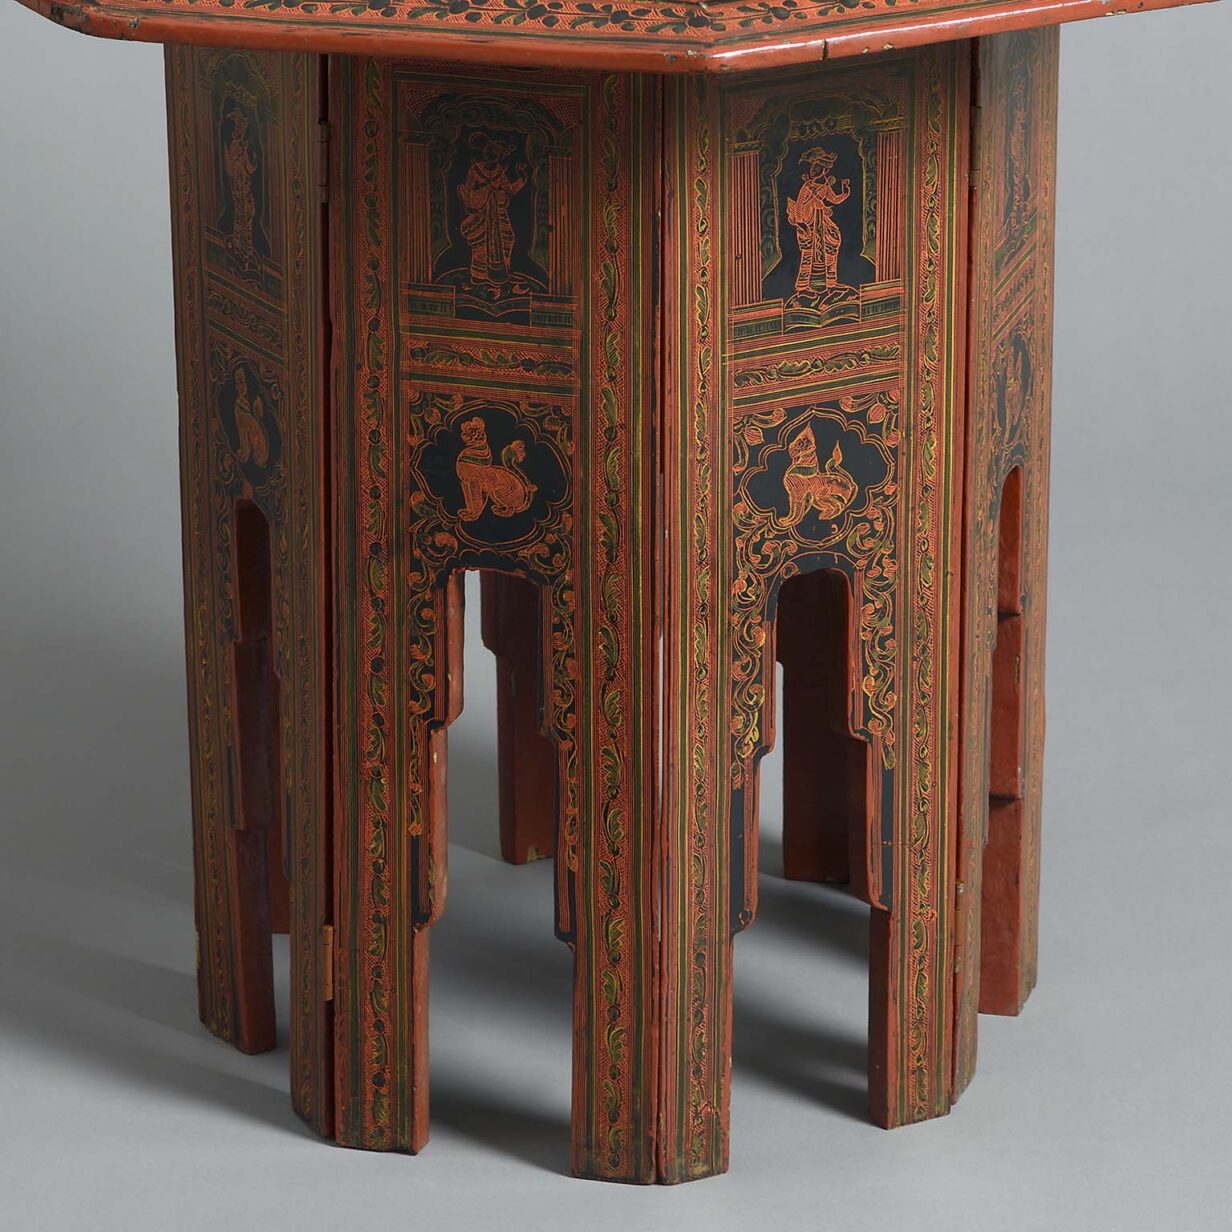 Late 19th century red lacquer occasional low table